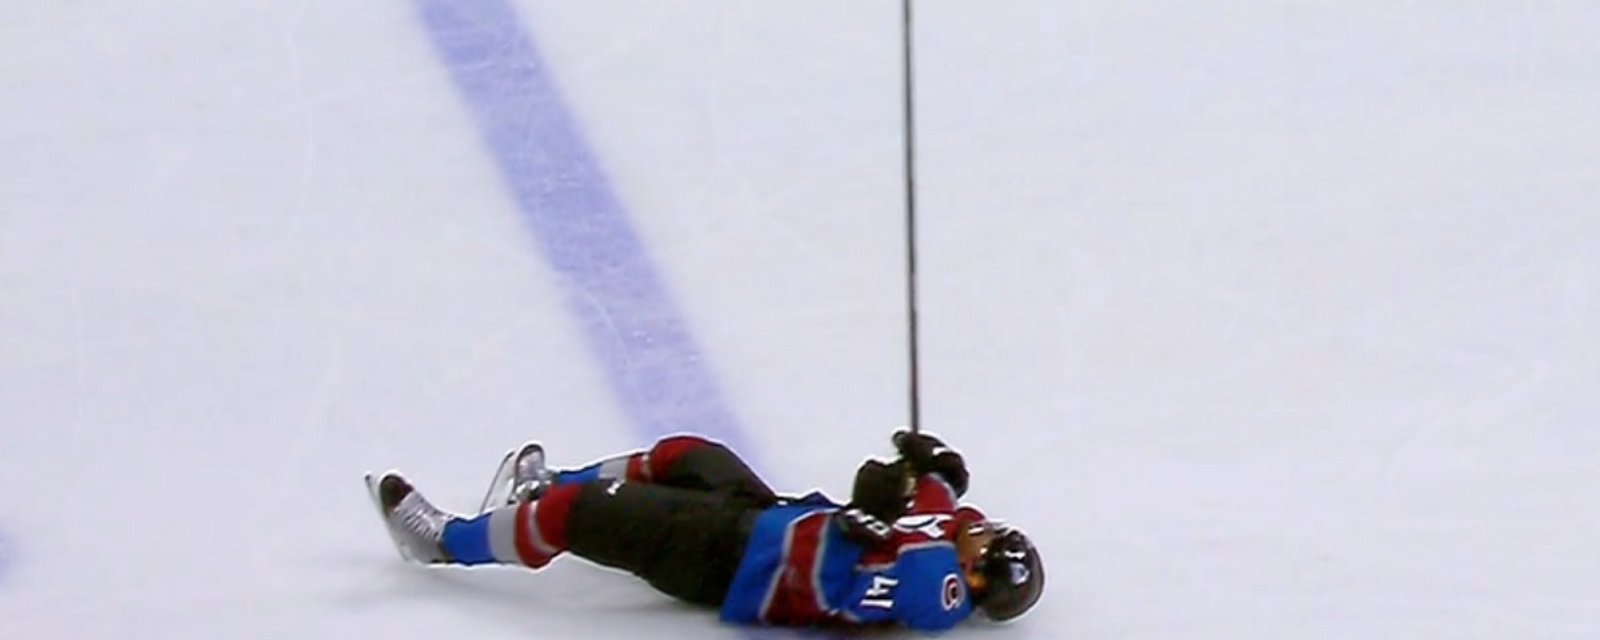 Nick Foligno facing suspension after knocking out Bellemare with an elbow.